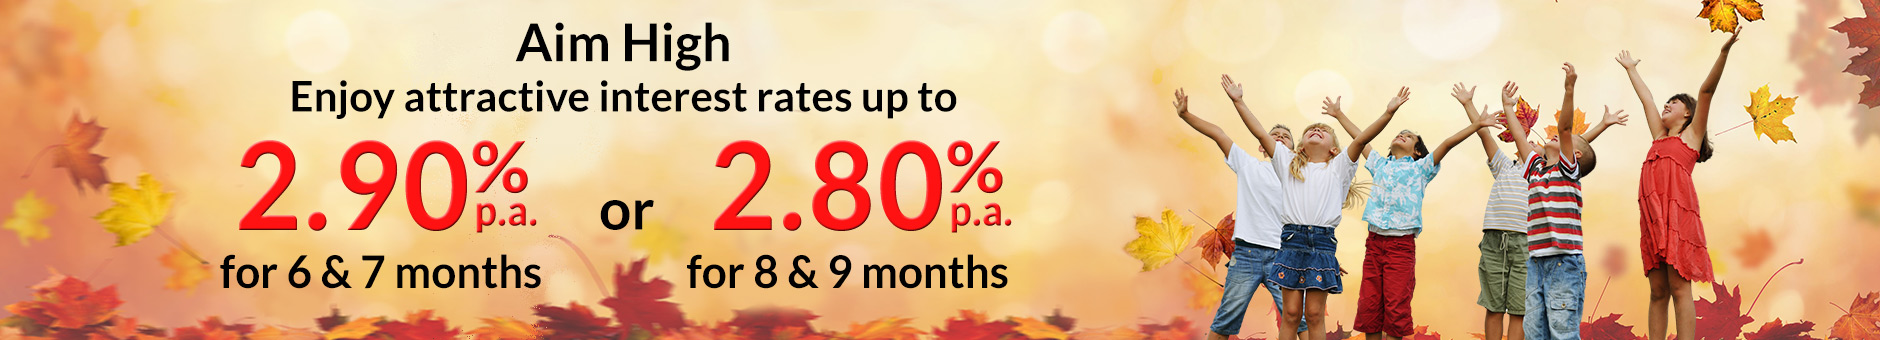 Fixed Deposit Promotion - Enjoy Attractive Rates up to 2.90% pa for 6 & 7 months and 2.80% pa for 8 & 9 months with minimum deposit of S20,000 and above.